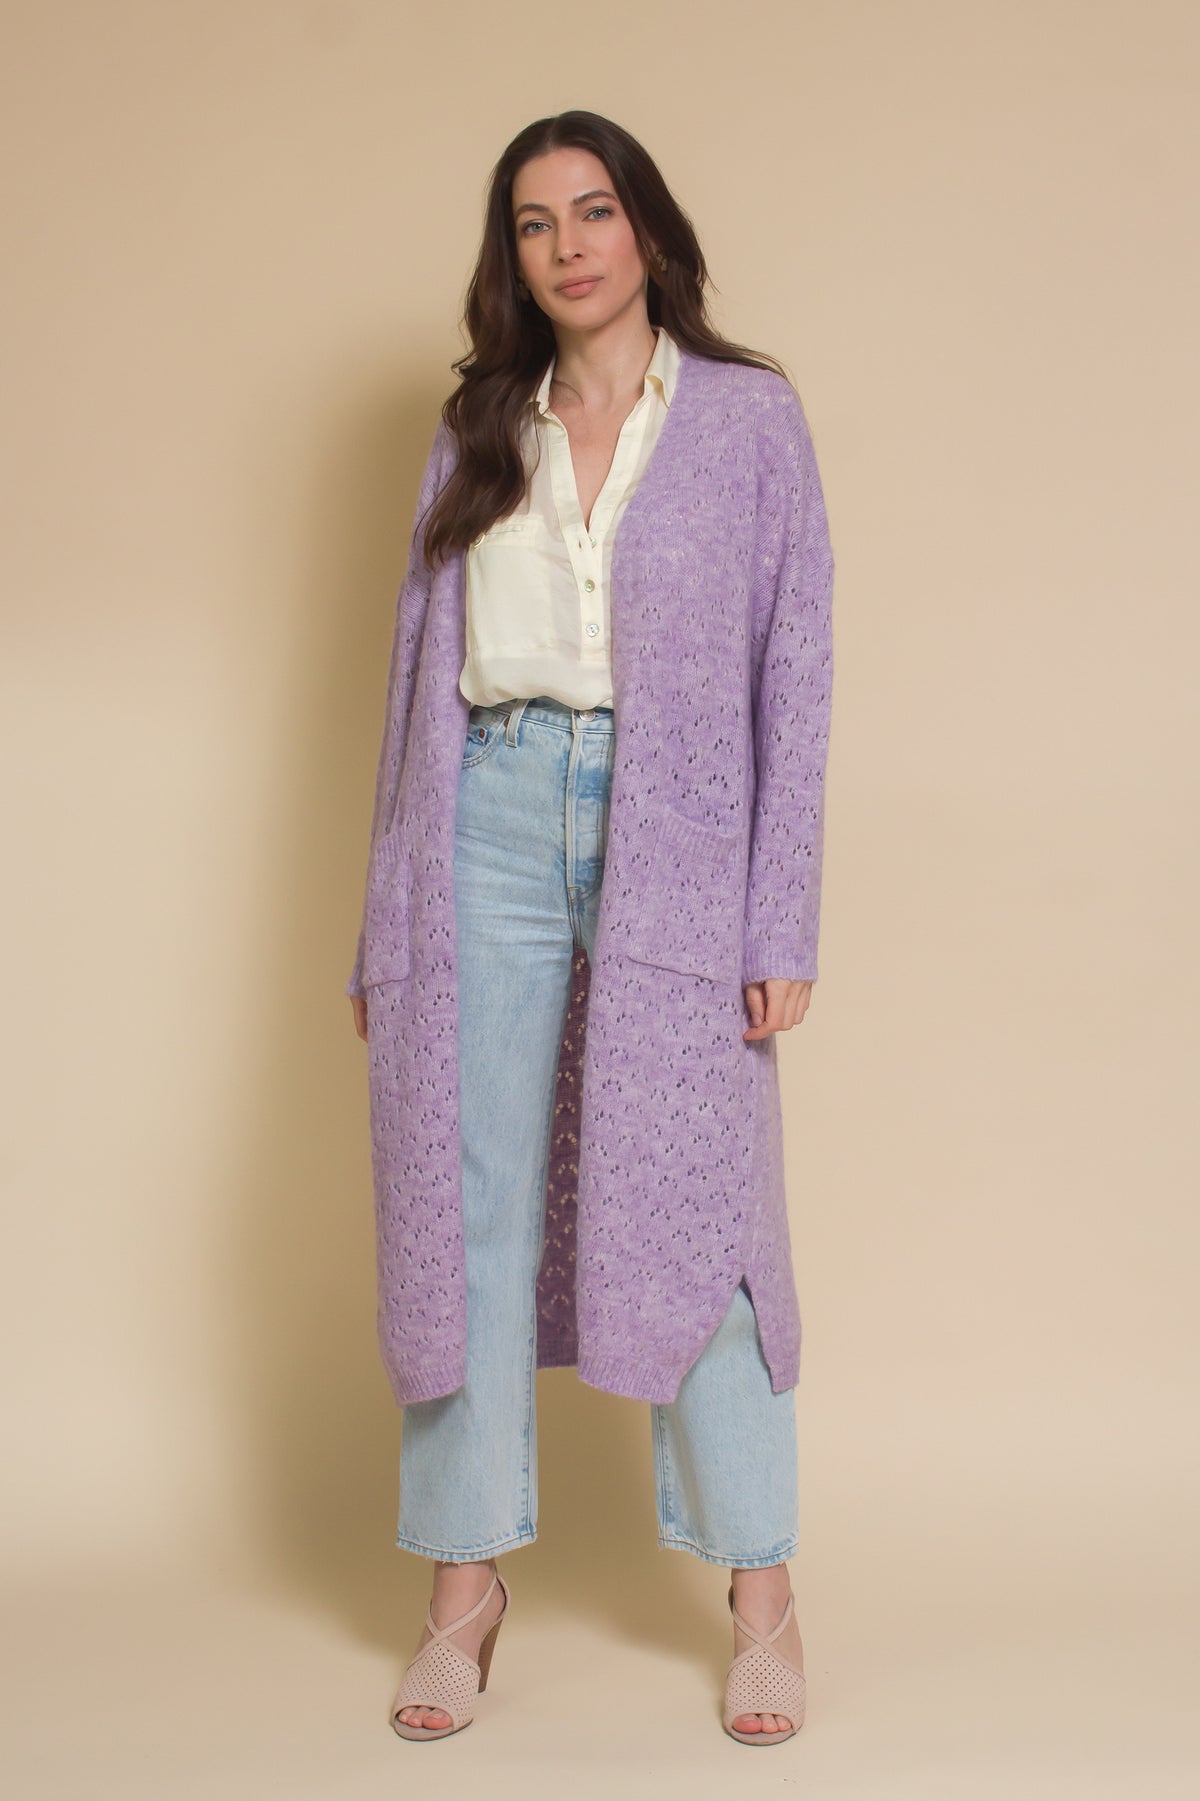 FRNCH Limonette Cardigan with eyelet detail, in lilac.